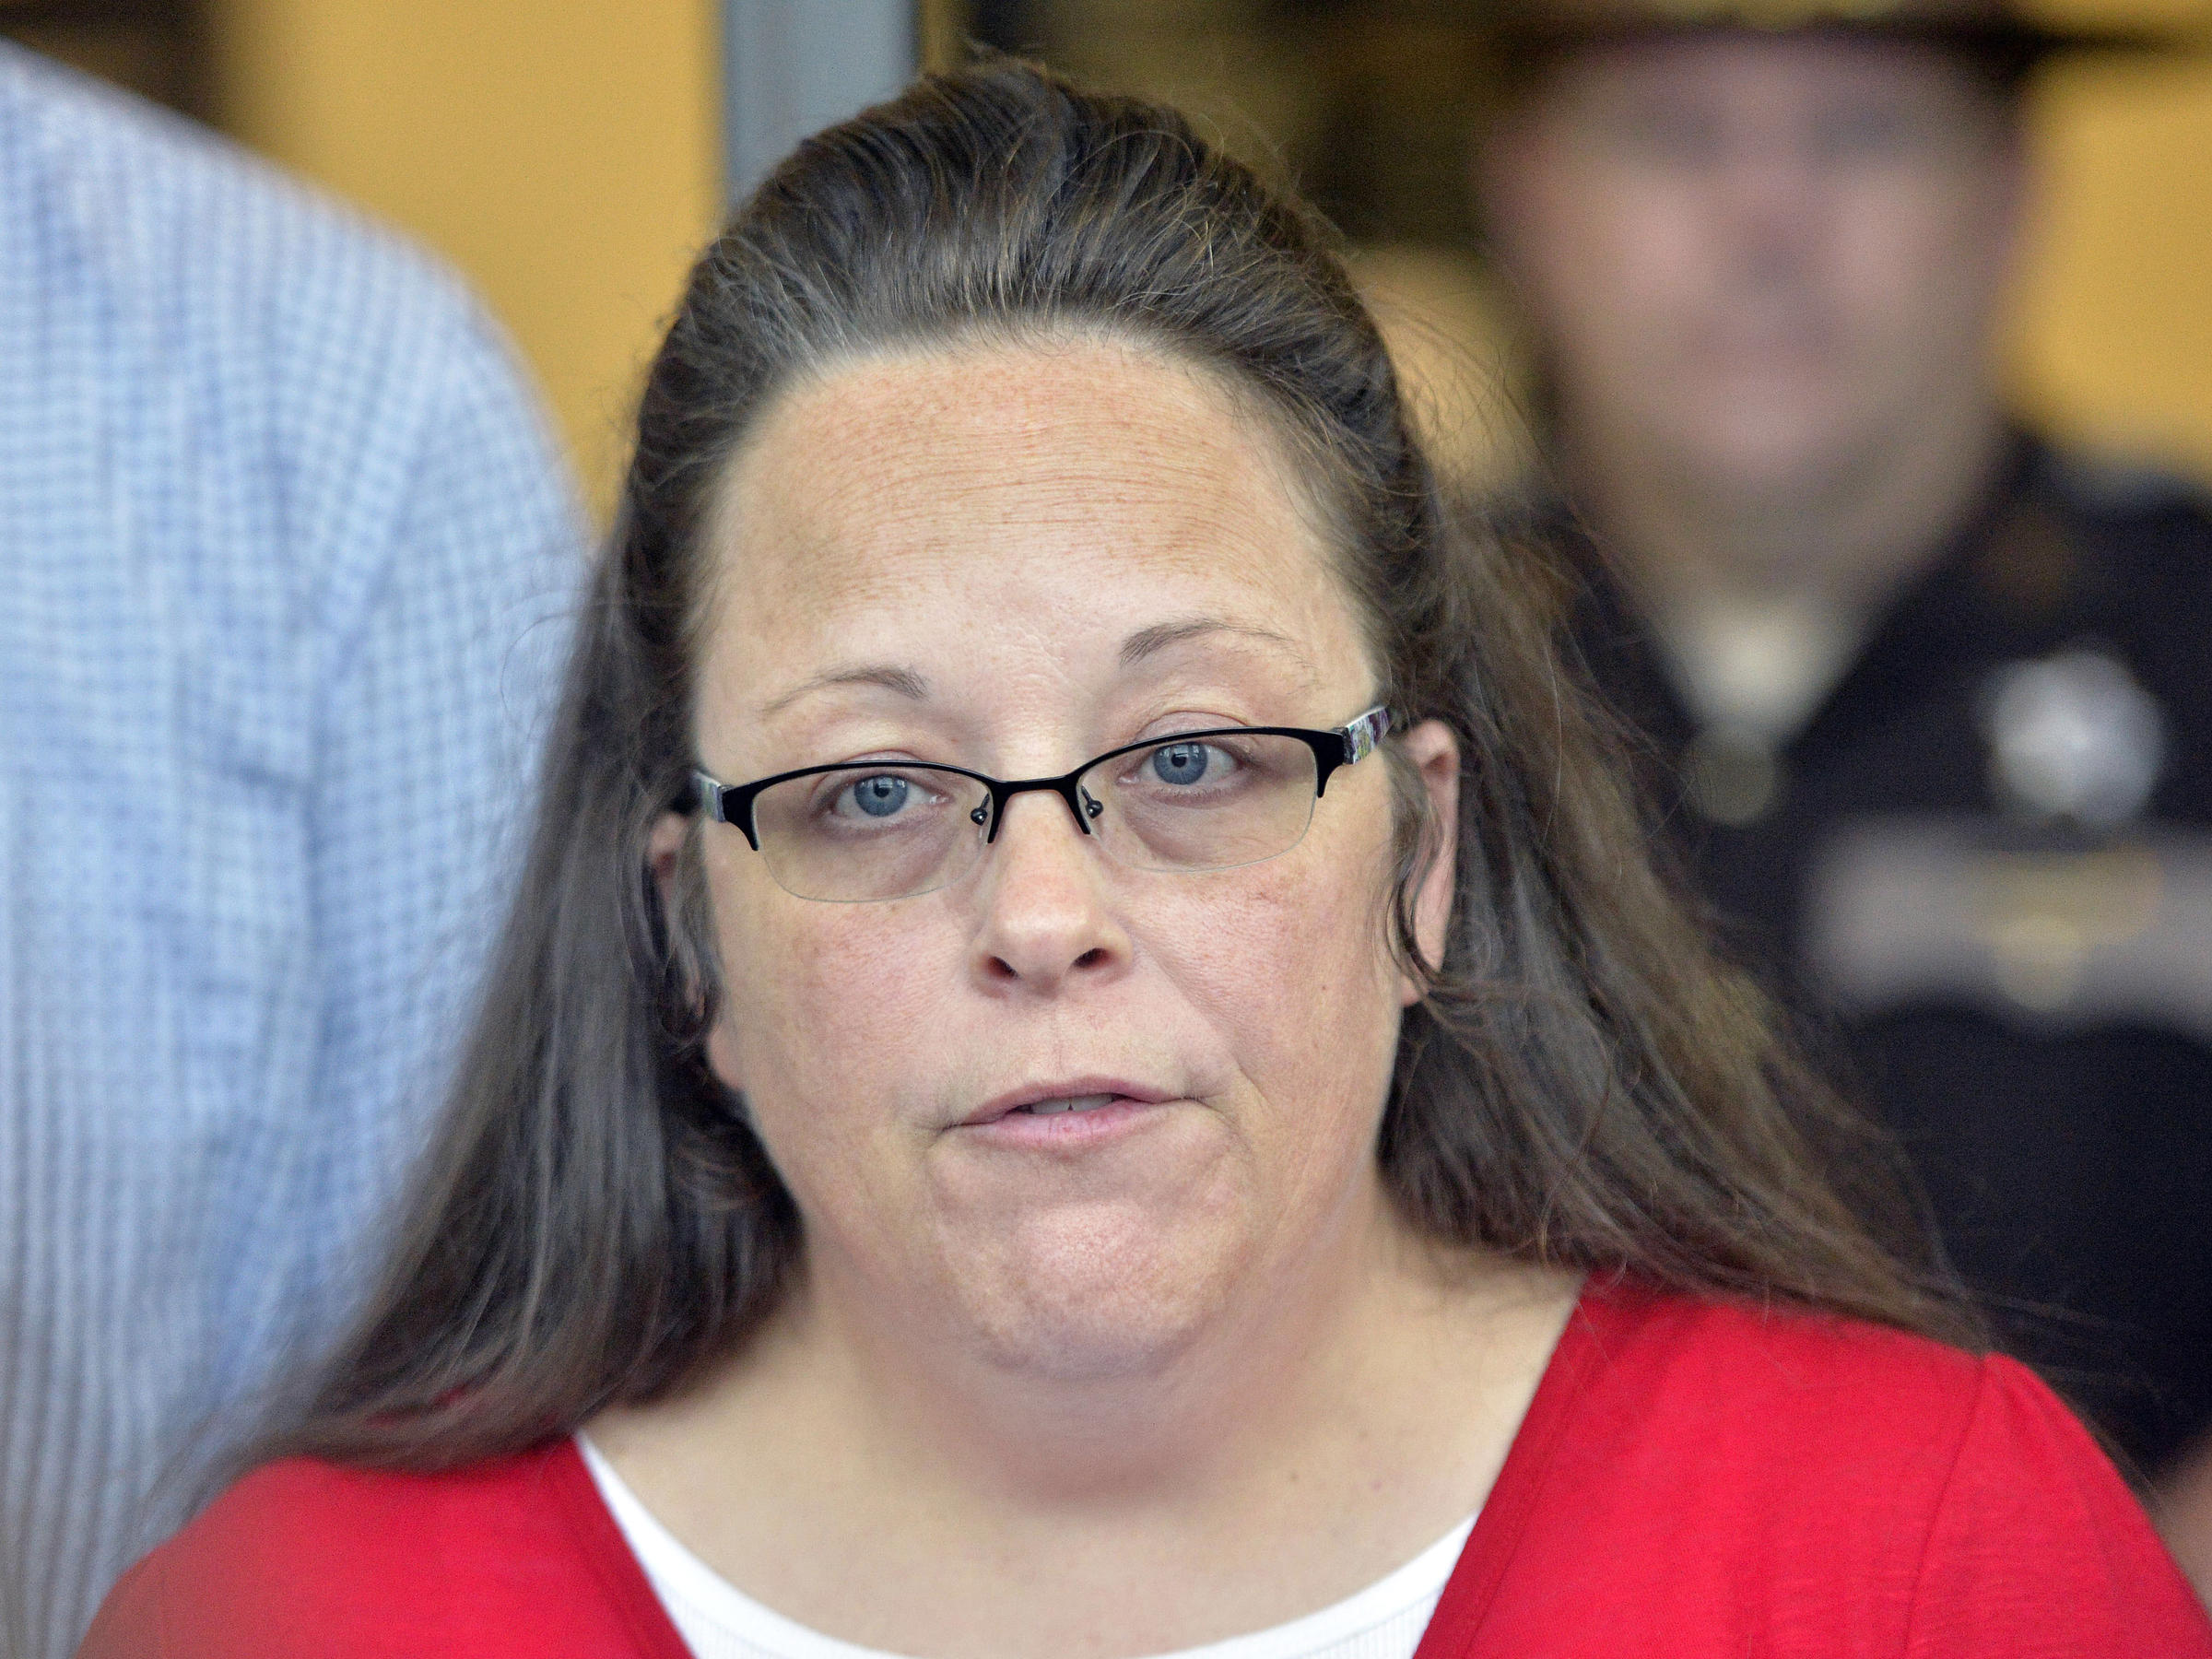 Kentucky Clerk Again Accused Of Interfering With County Marriage